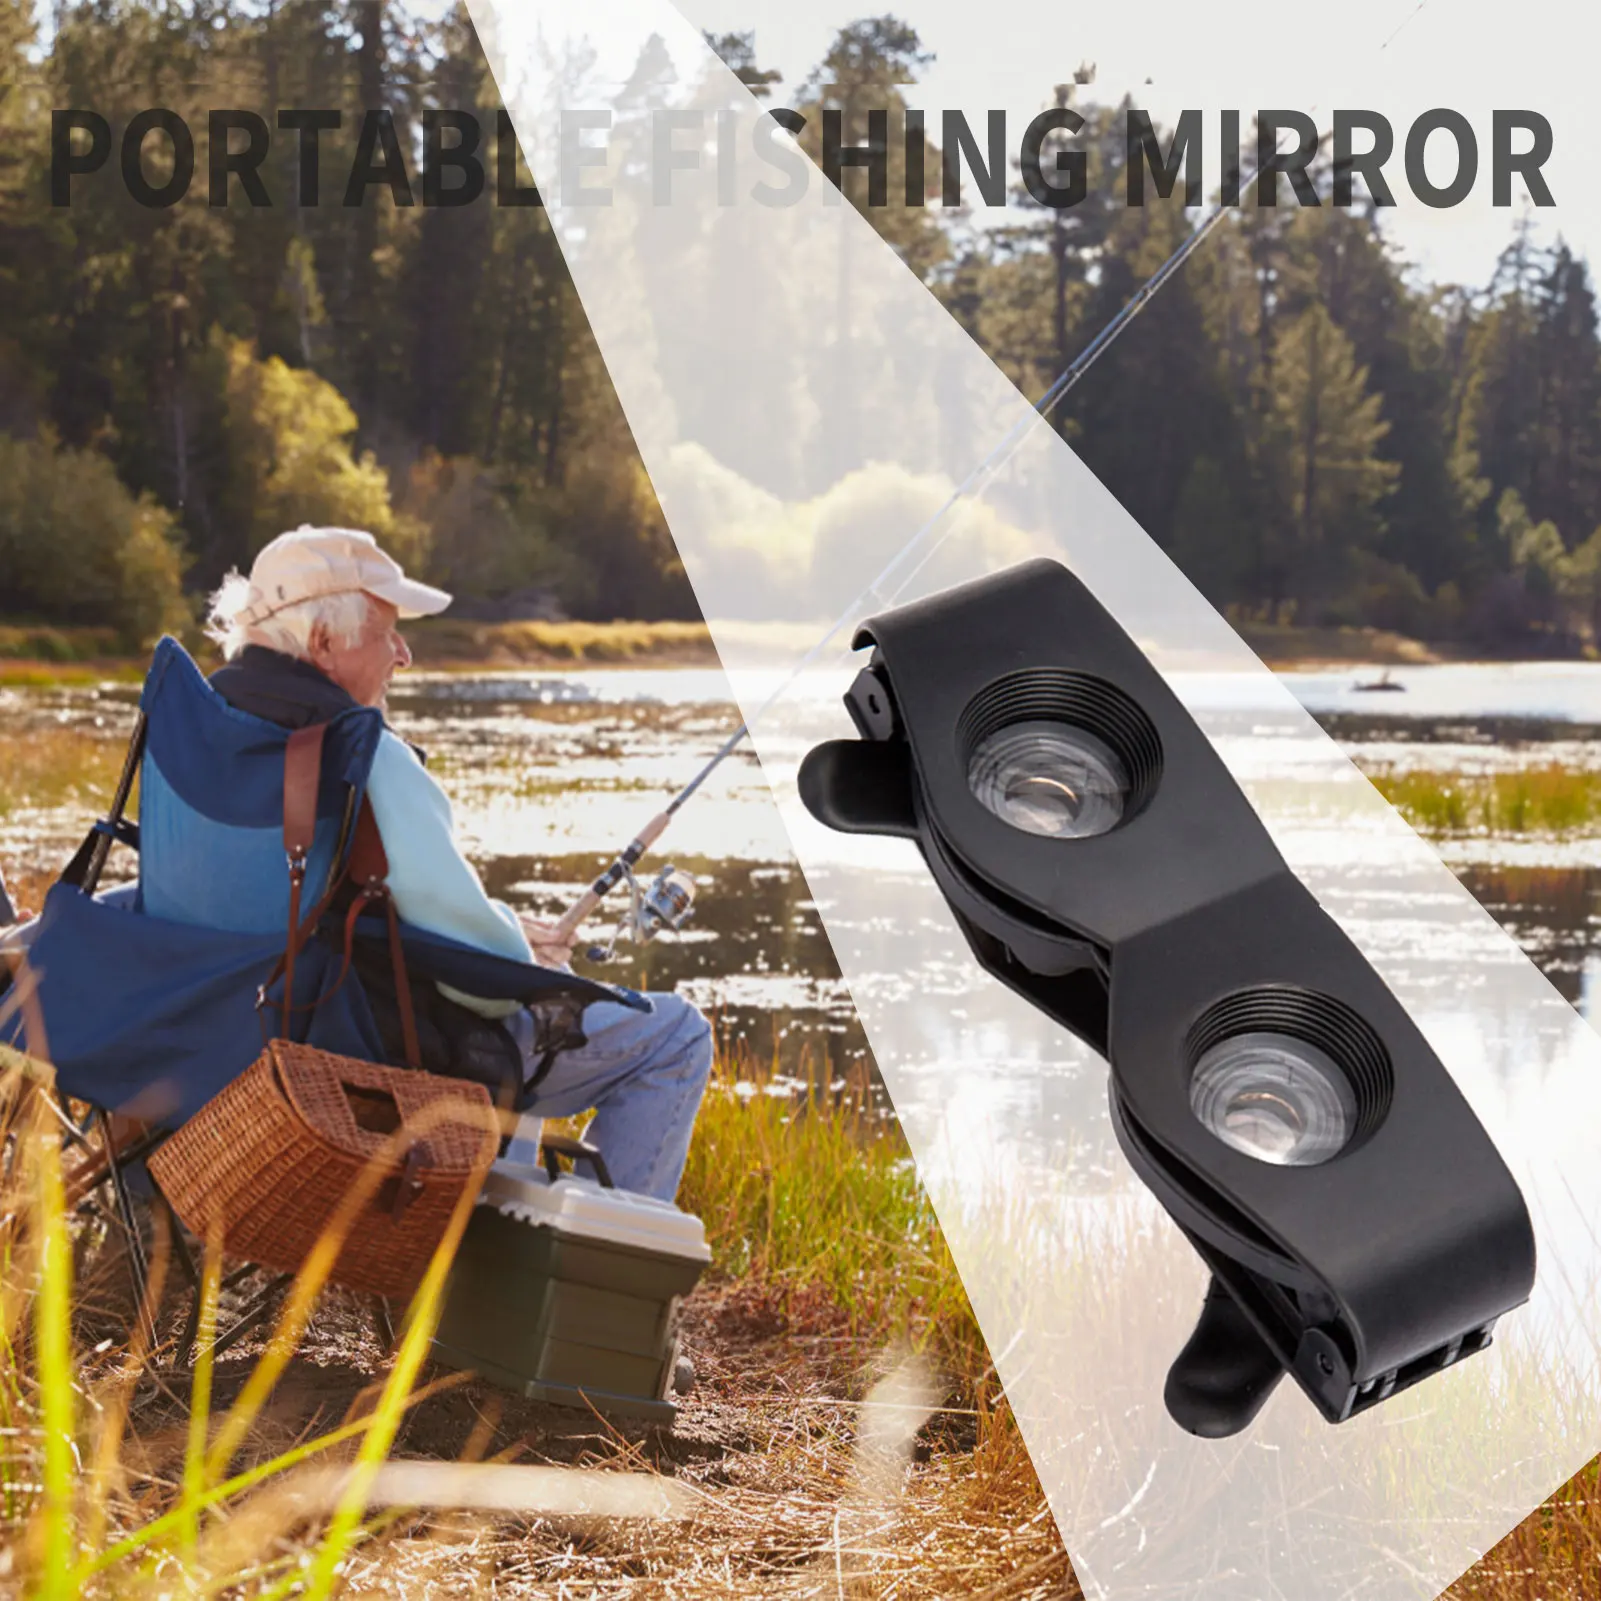 Hands-Free Binocular Glasses For Fishing Portable Wearable Binoculars  Telescope Magnifier Glasses For Hunting Hiking Outdoor